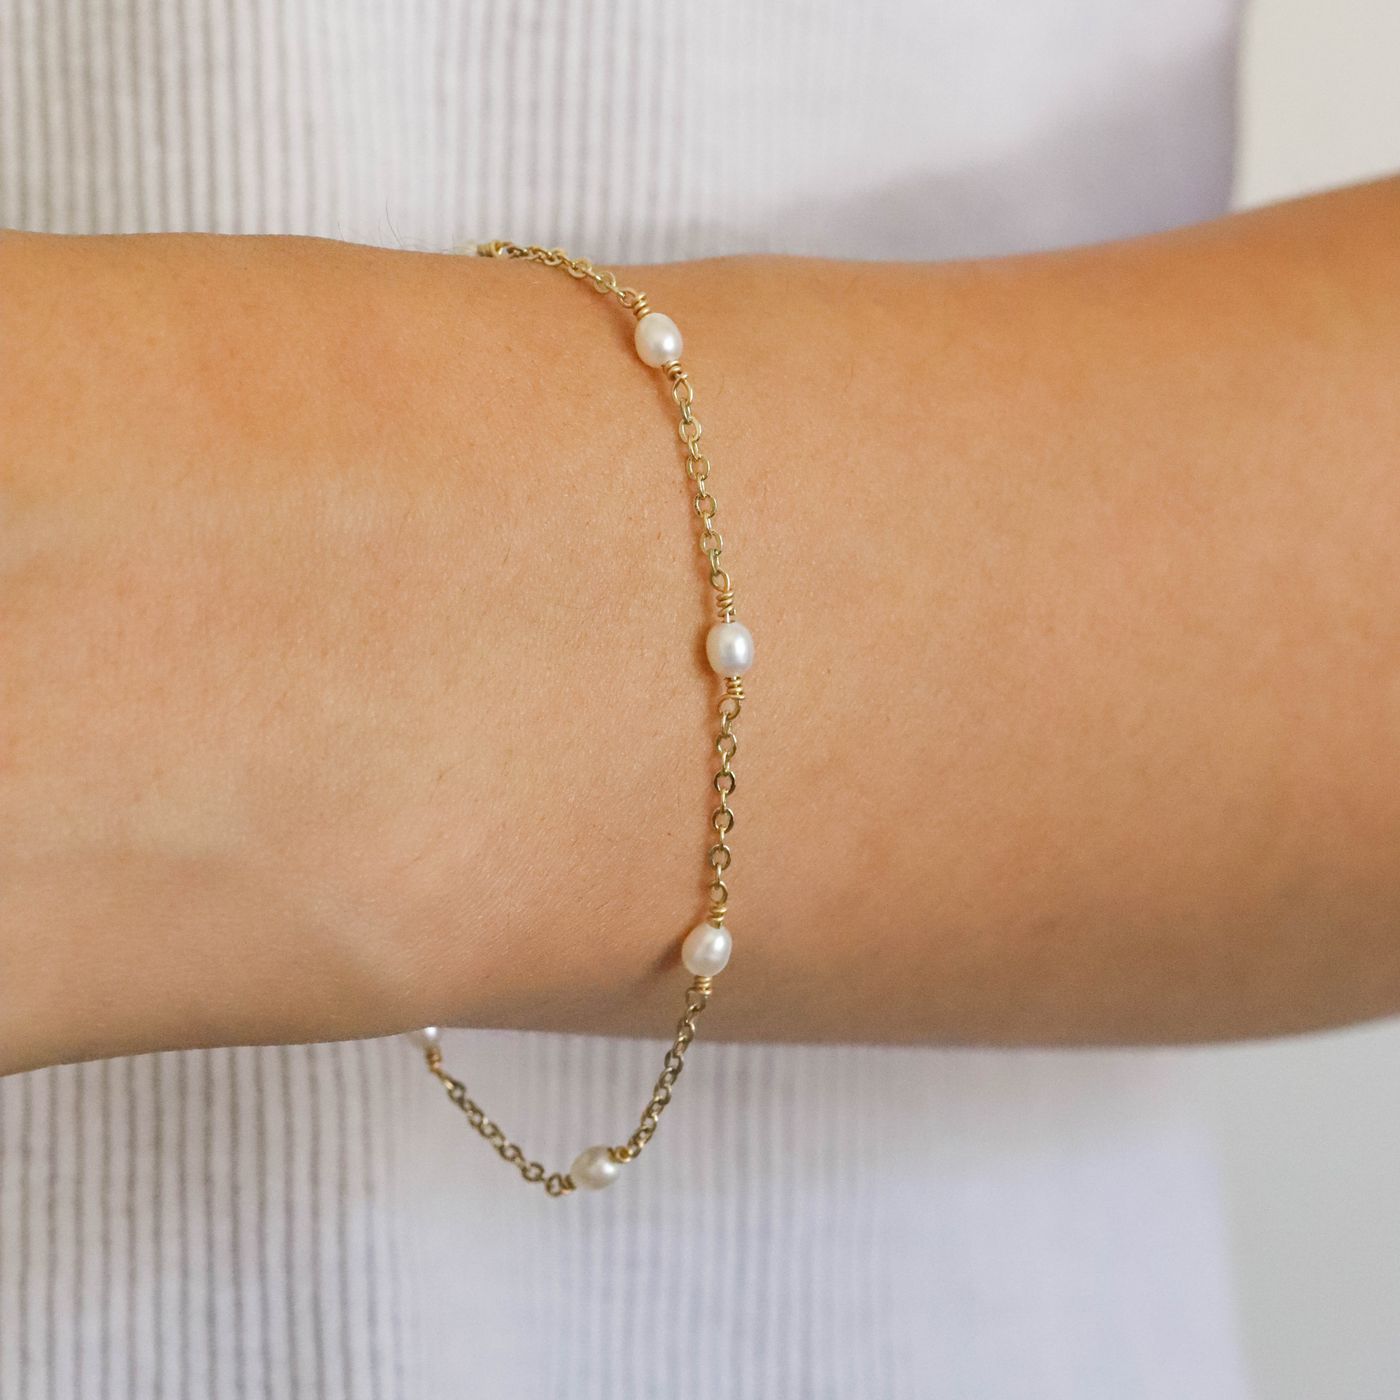 Gold bracelet with pearls